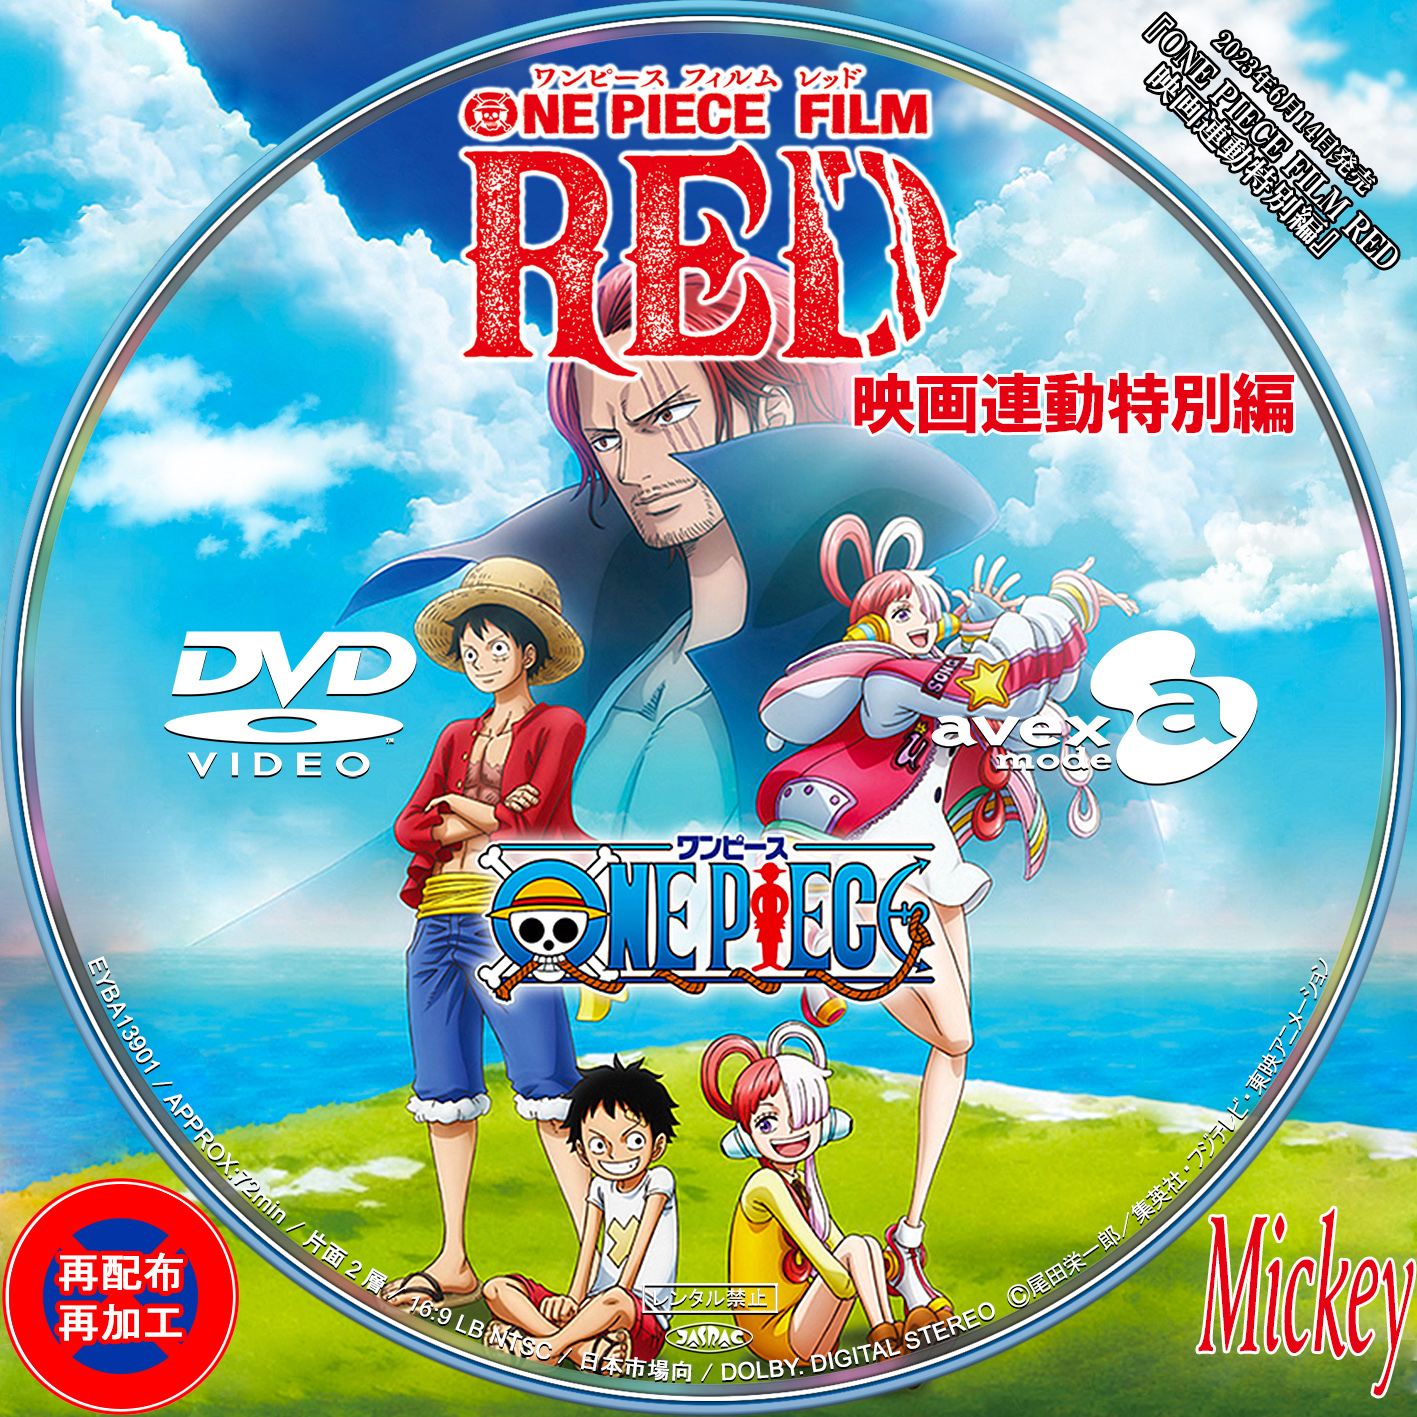 One Piece Film Red Dvd Mickey S Request Label Collection